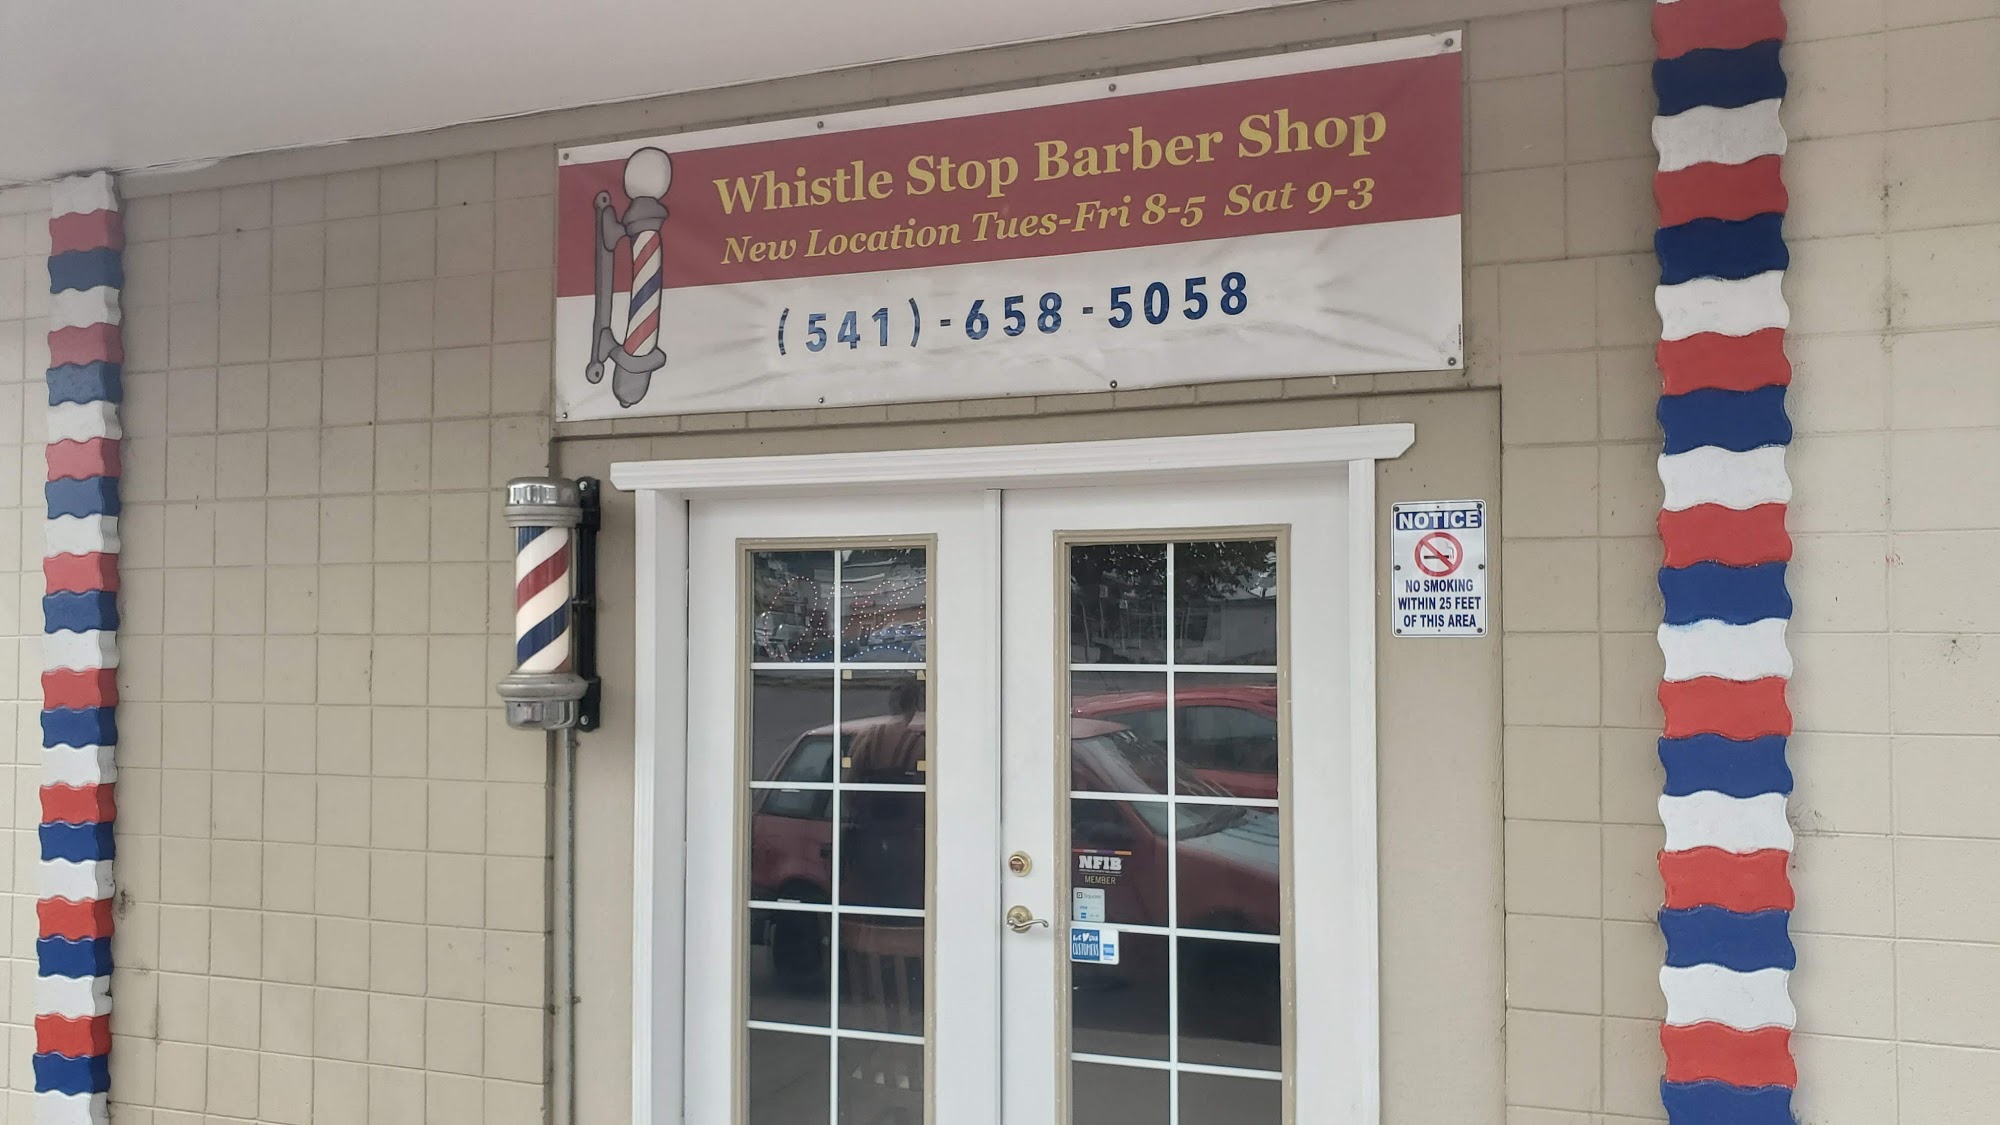 Whistle Stop Barber Shop